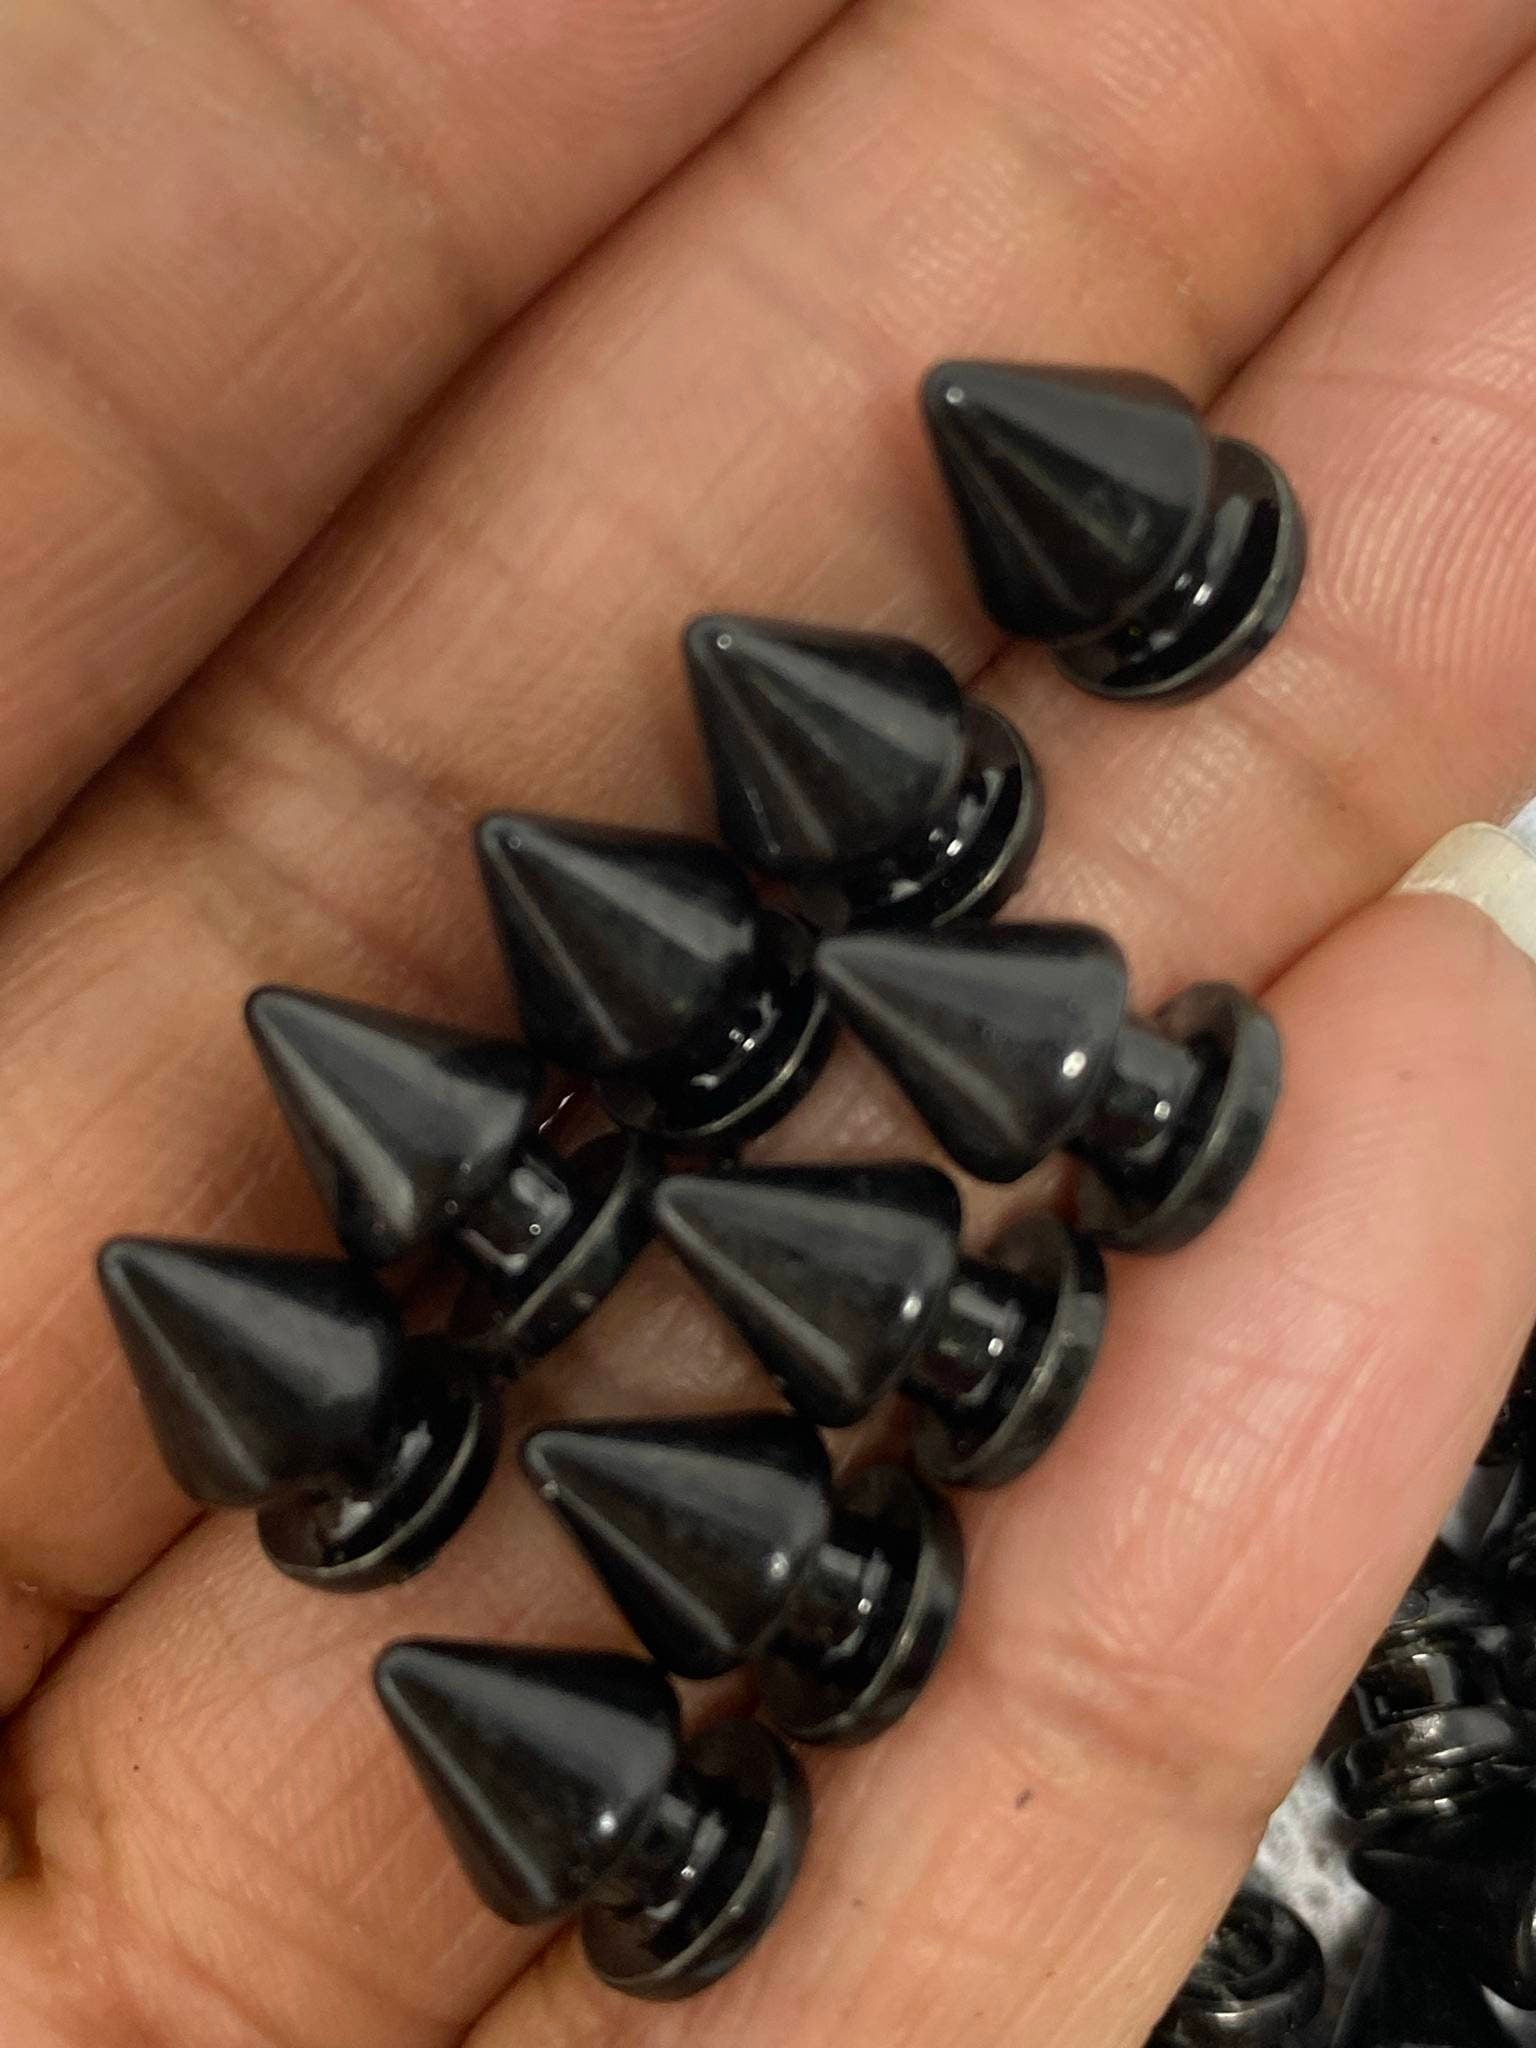 New,"Black" Spikes, 12mm, 100-pcs, Spikes w/Screws, Small Cone Spikes & Studs, Metallic Screw-Back for DIY Punk, Leather, Bags, and Apparel